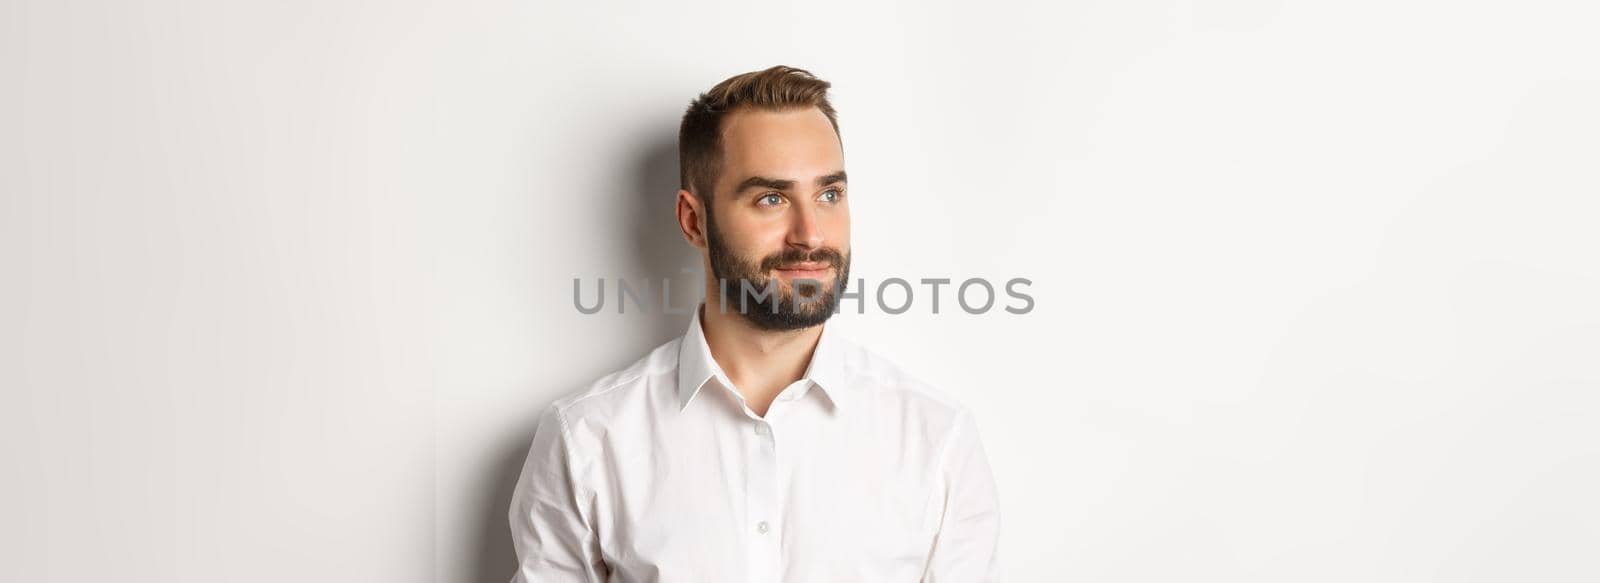 Close-up of confident businessman in white shirt, looking left and smiling satisfied, standing over white background.